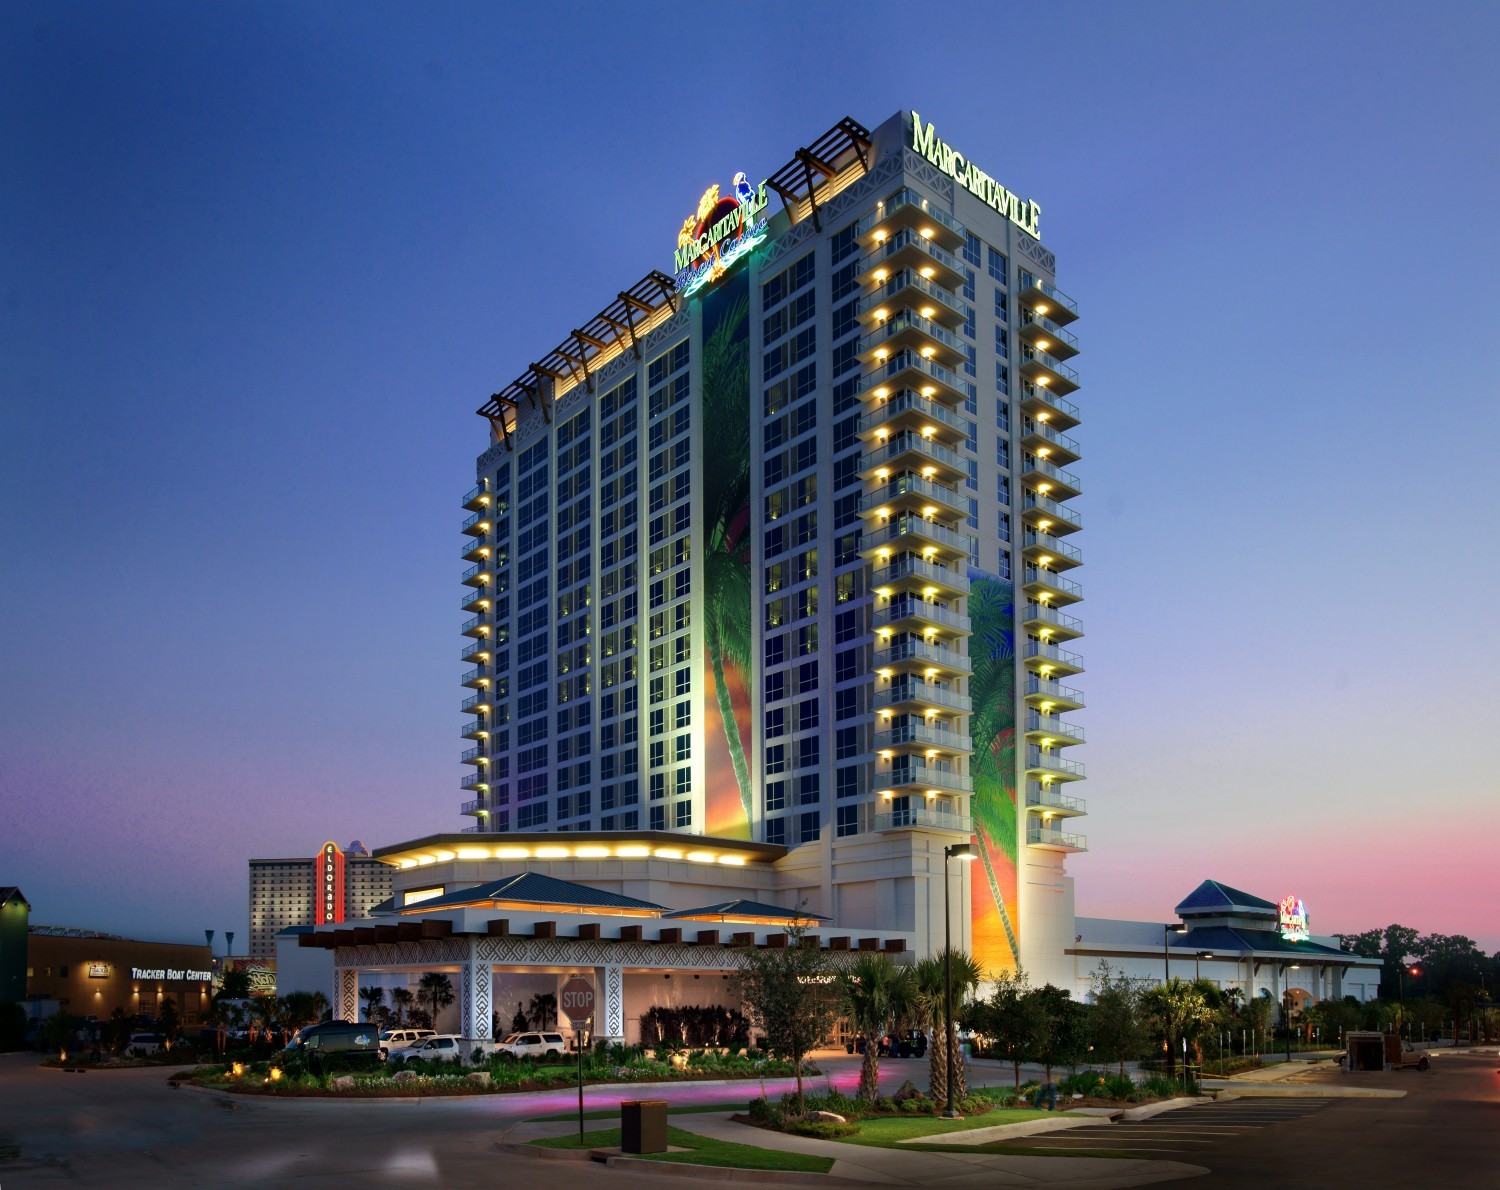 Margaritaville in Bossier City, Louisiana, is another amazing property in VICI's regional gaming portfolio.